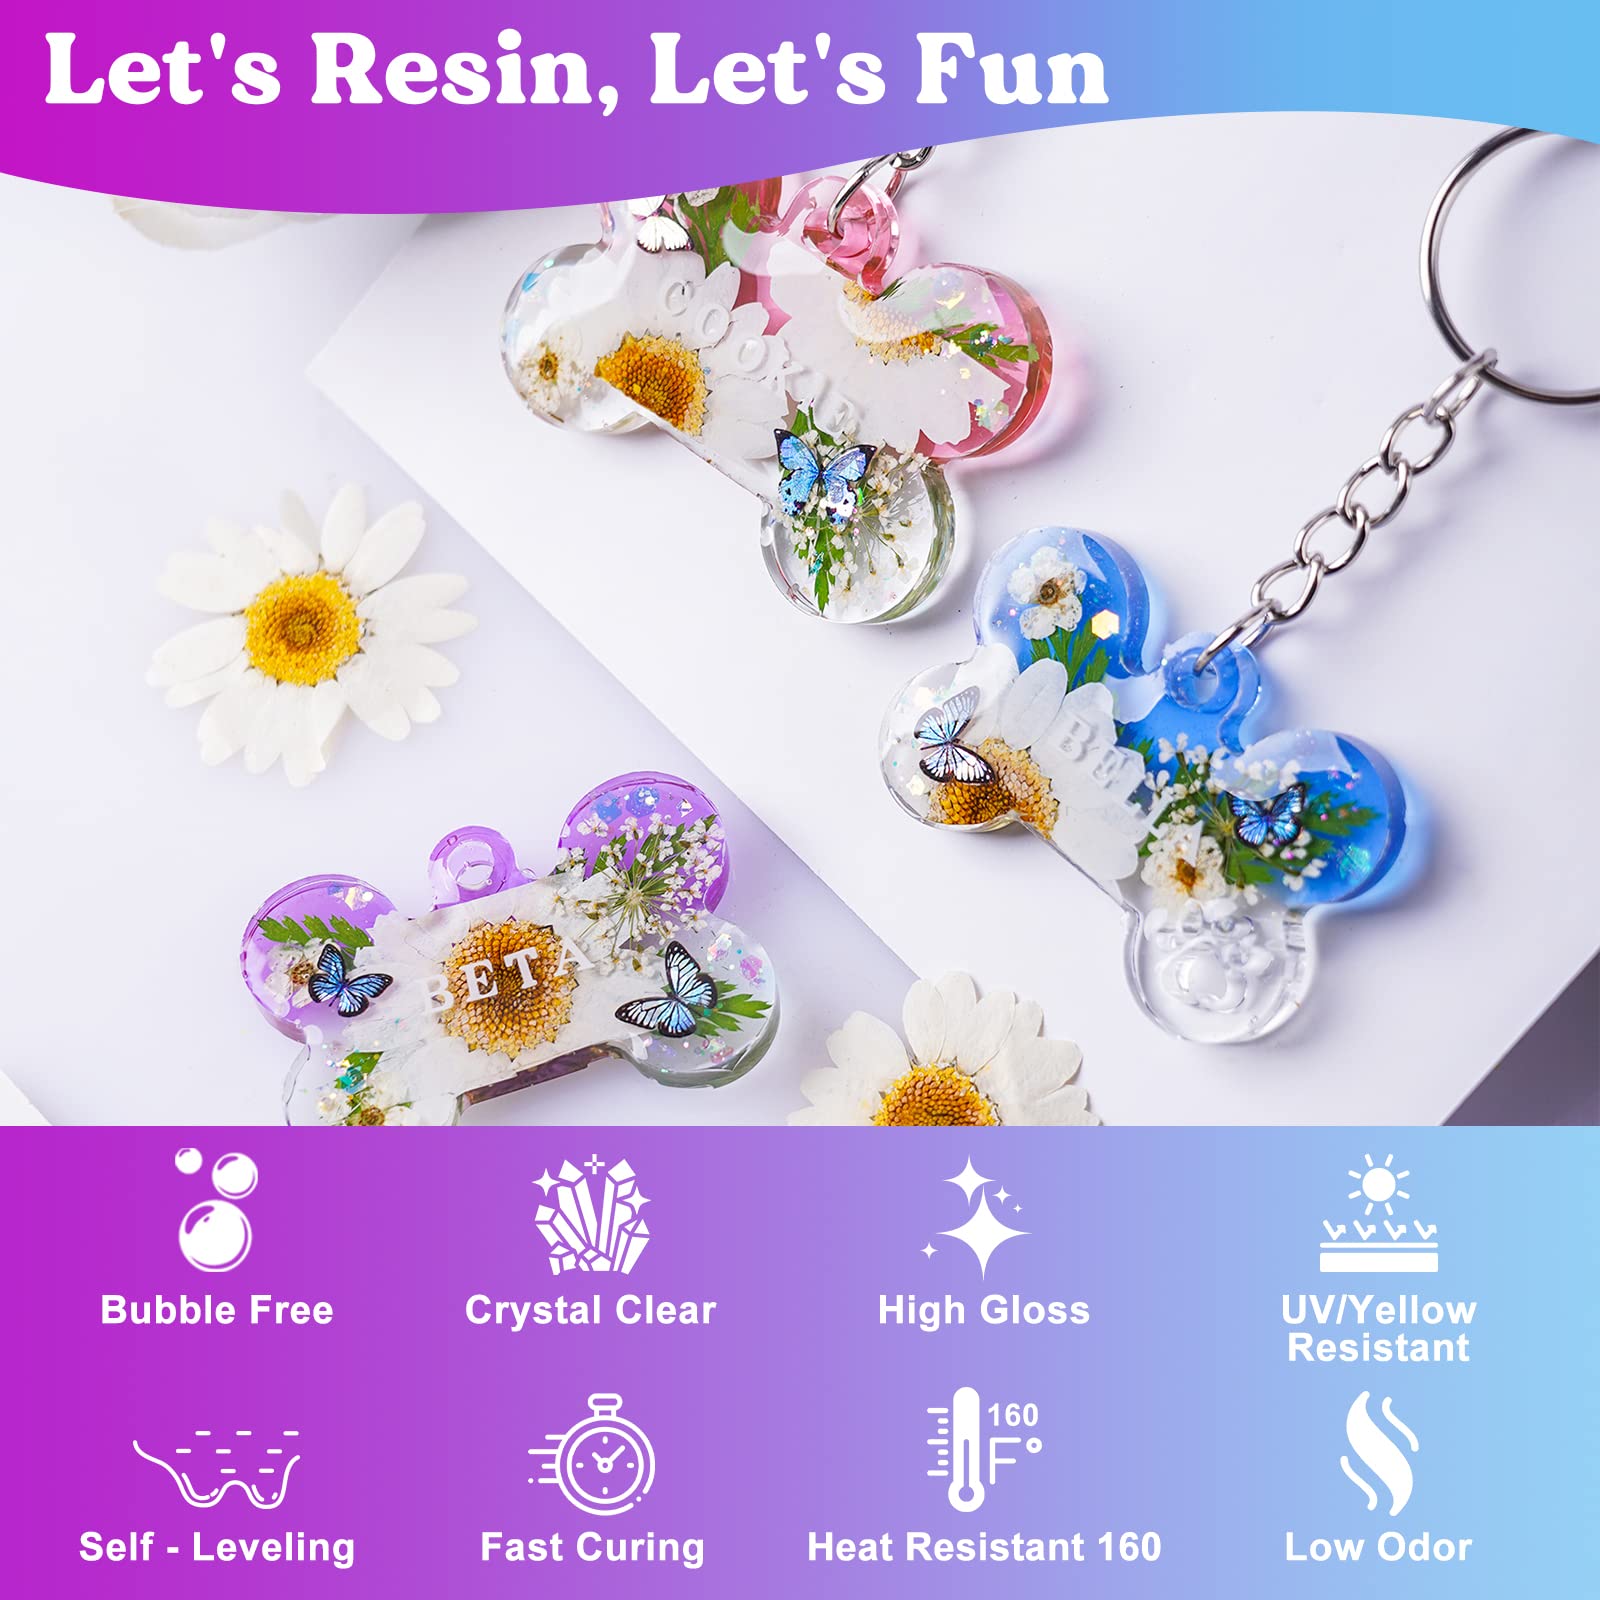 LET'S RESIN 16oz Clear Epoxy Resin,Bubbles Free Casting Resin for Art Crafts, Jewelry Making, Crystal Clear 2 Part Resin and Hardener with Mixing Cups, Stir Stick, Transfer Pipettes, Gloves